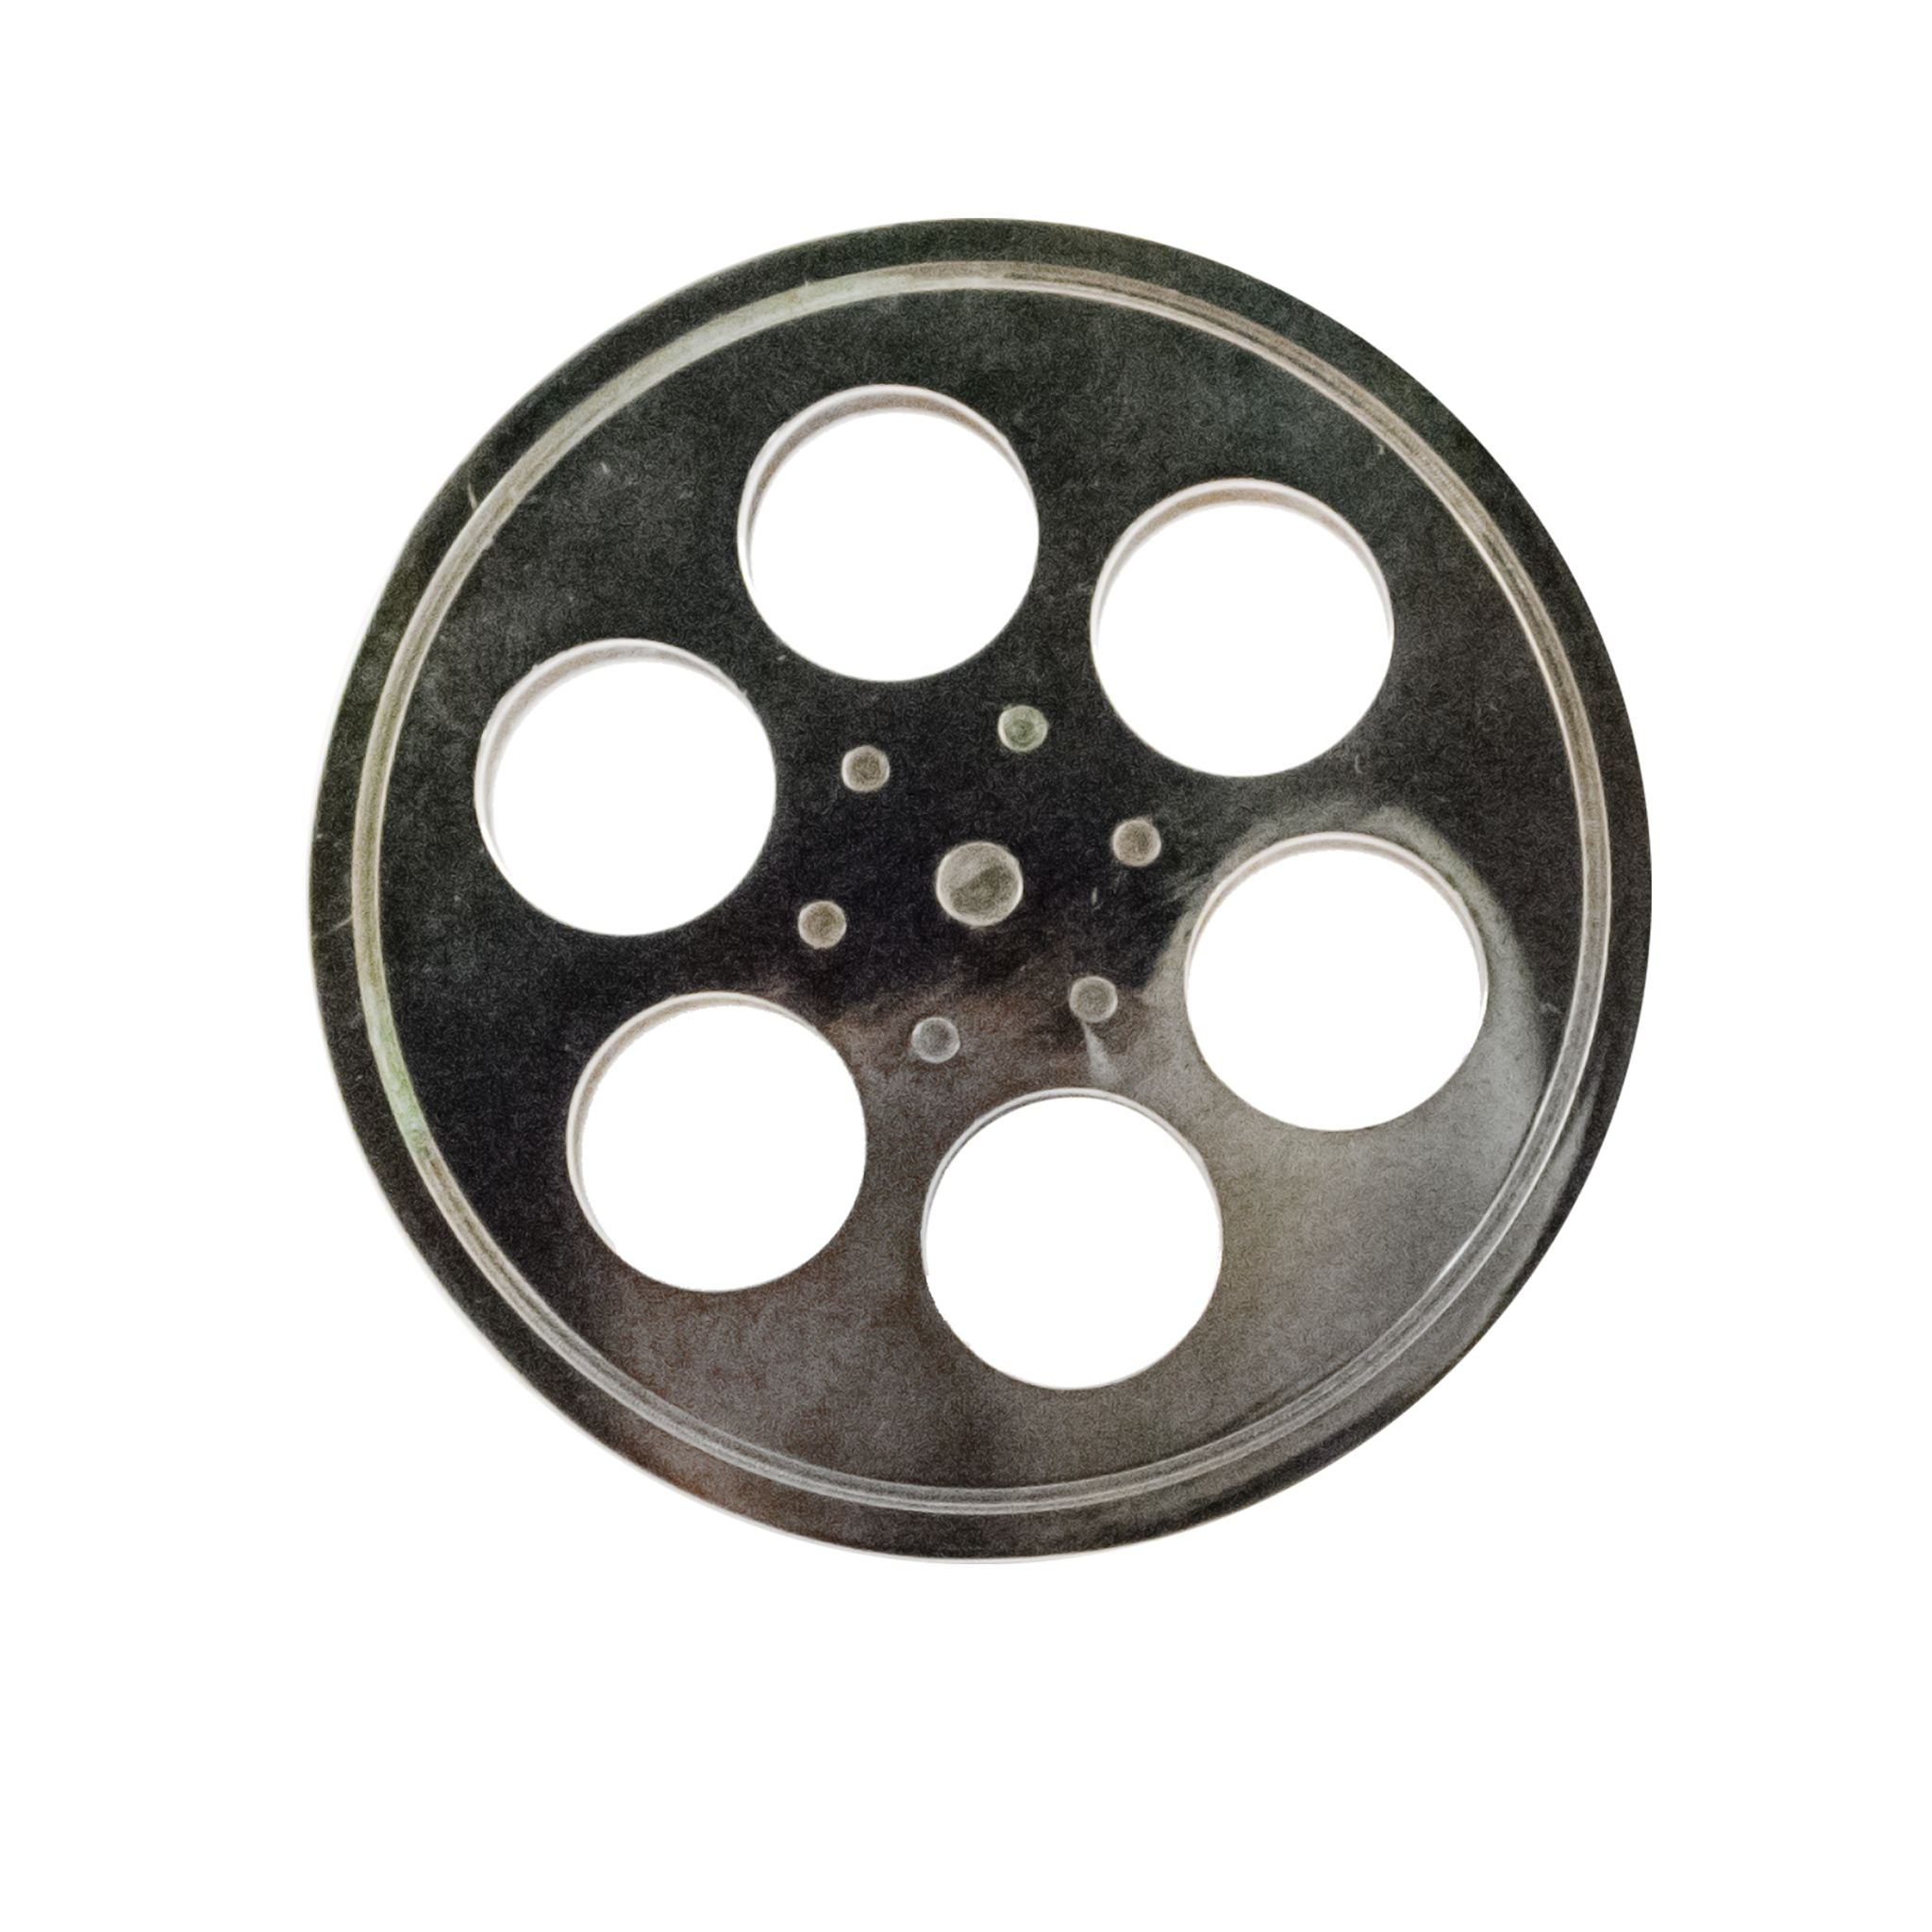 An image of a small brass film reel-shaped knob against a neutral background. The knob features intricate detailing resembling a cinematic film reel, adding a touch of nostalgia and creativity to furniture or drawers.